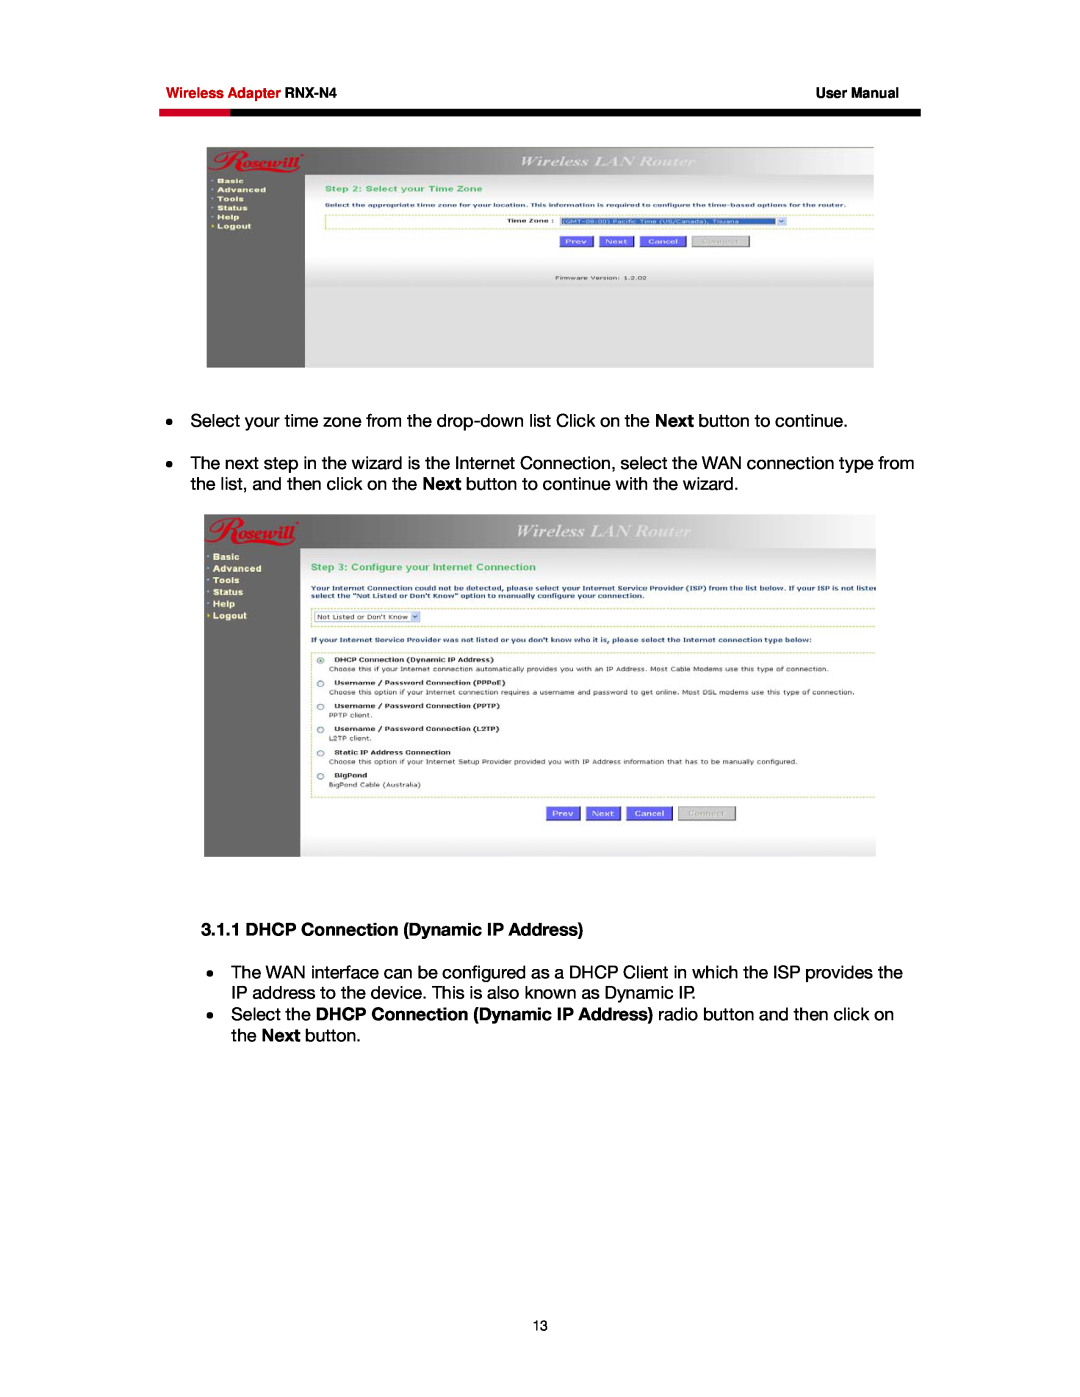 Rosewill RNX-N4 user manual DHCP Connection Dynamic IP Address 